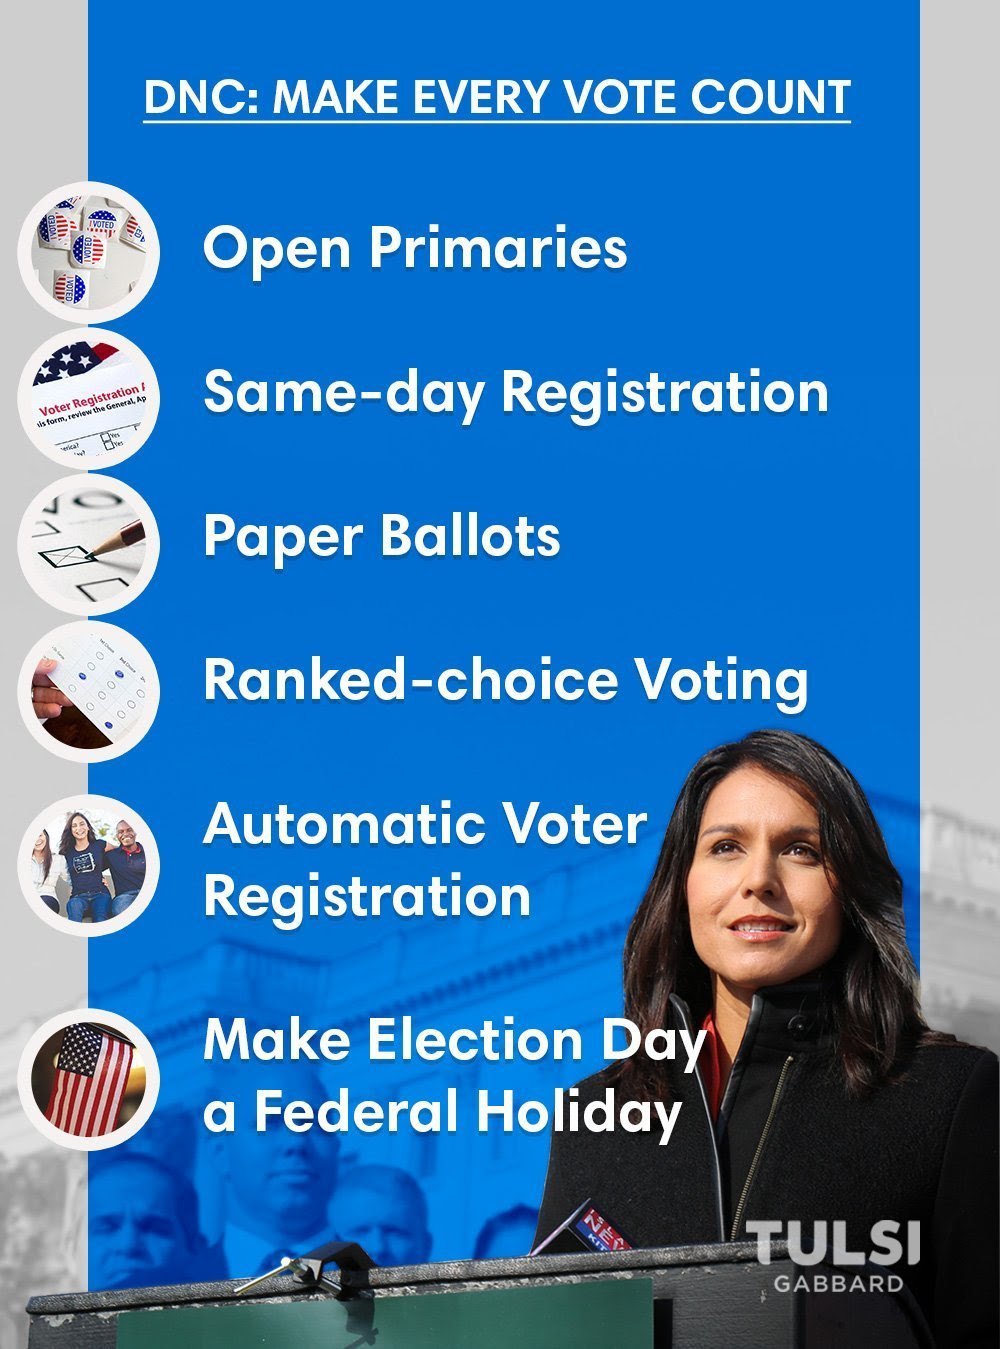 DNC: Make Every Vote Count Graphic